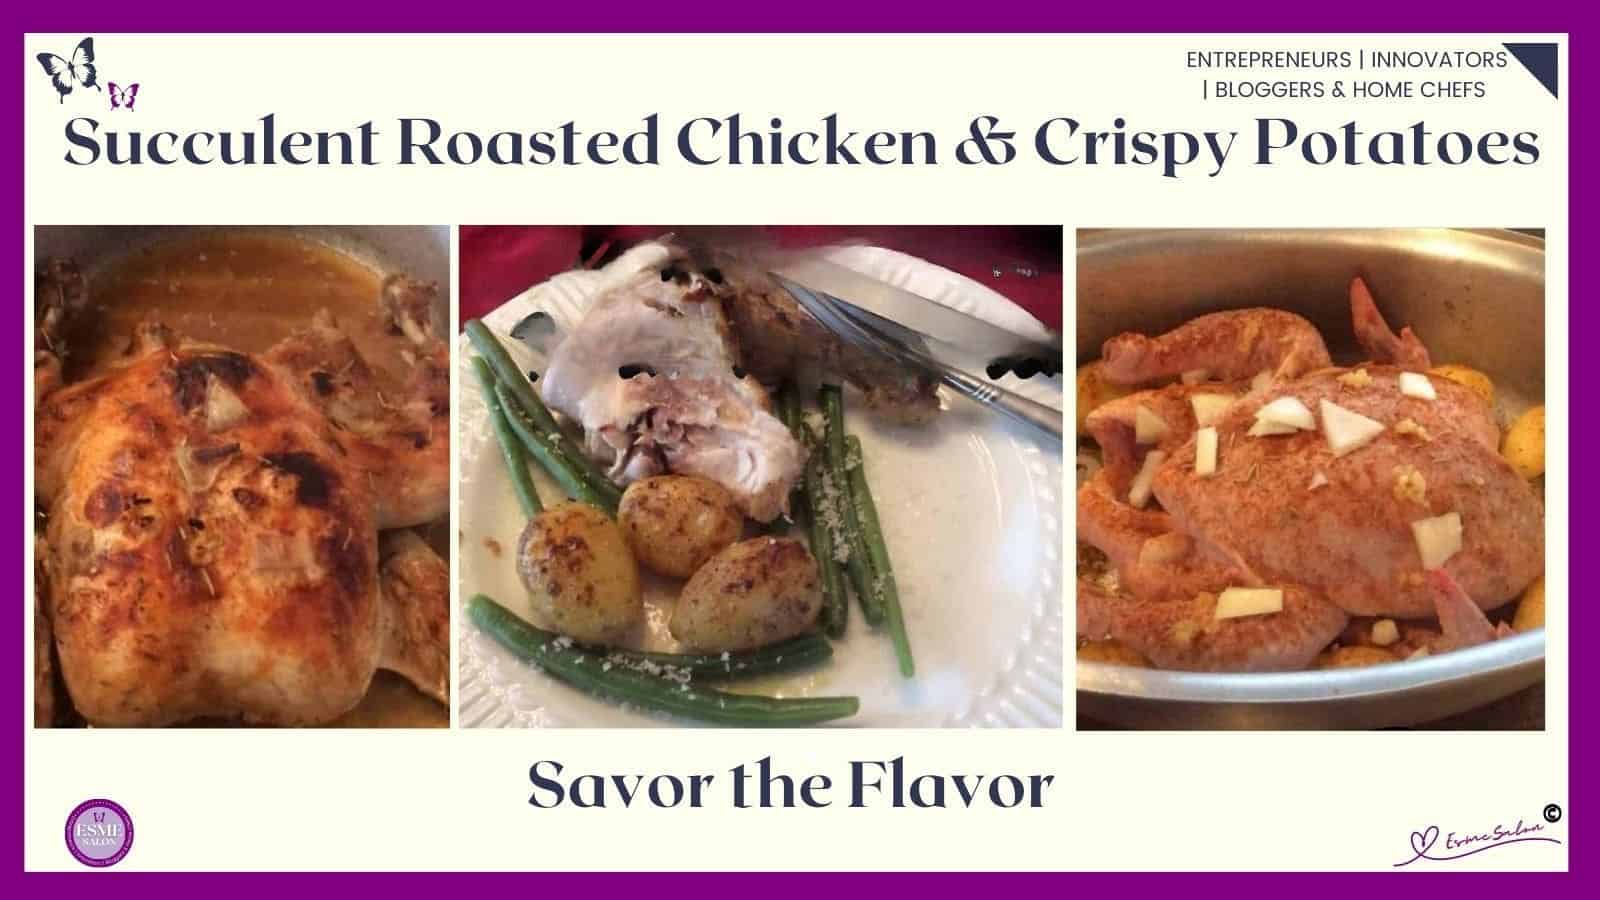 an image of a chicken baked and in a casserole and a portion served with roasted potatoes and green beans